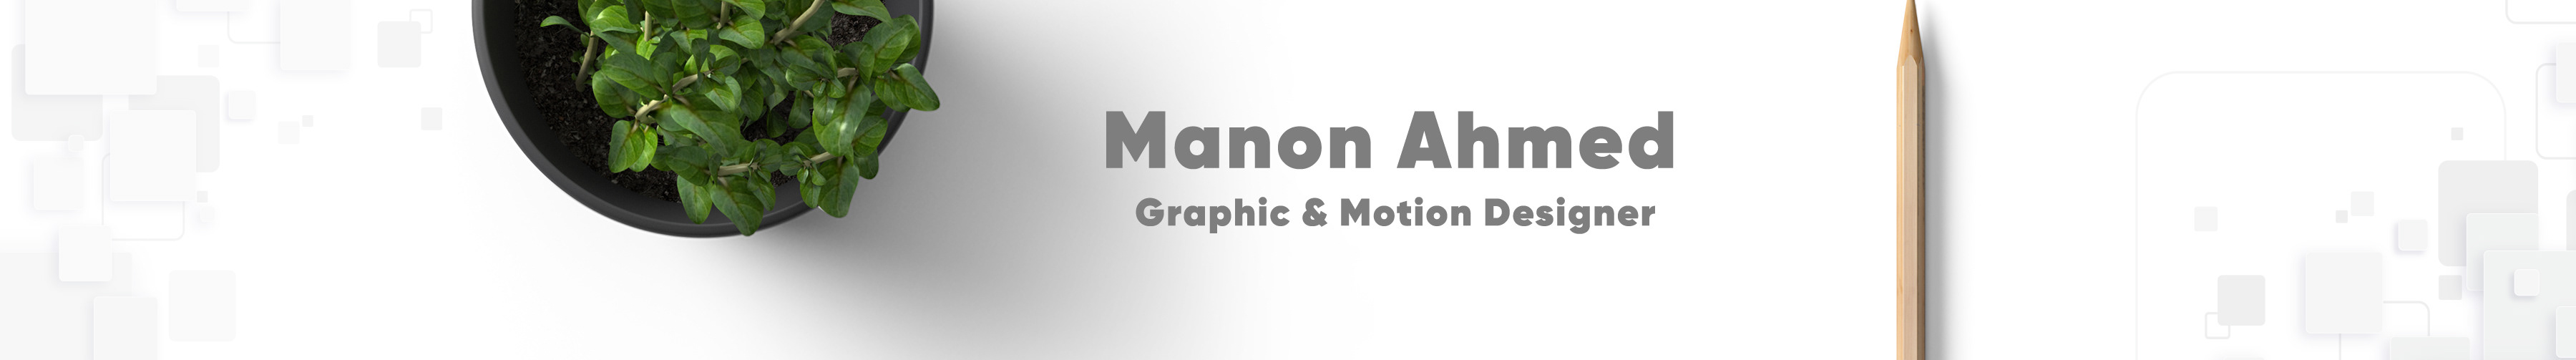 Manon Ahmed's profile banner